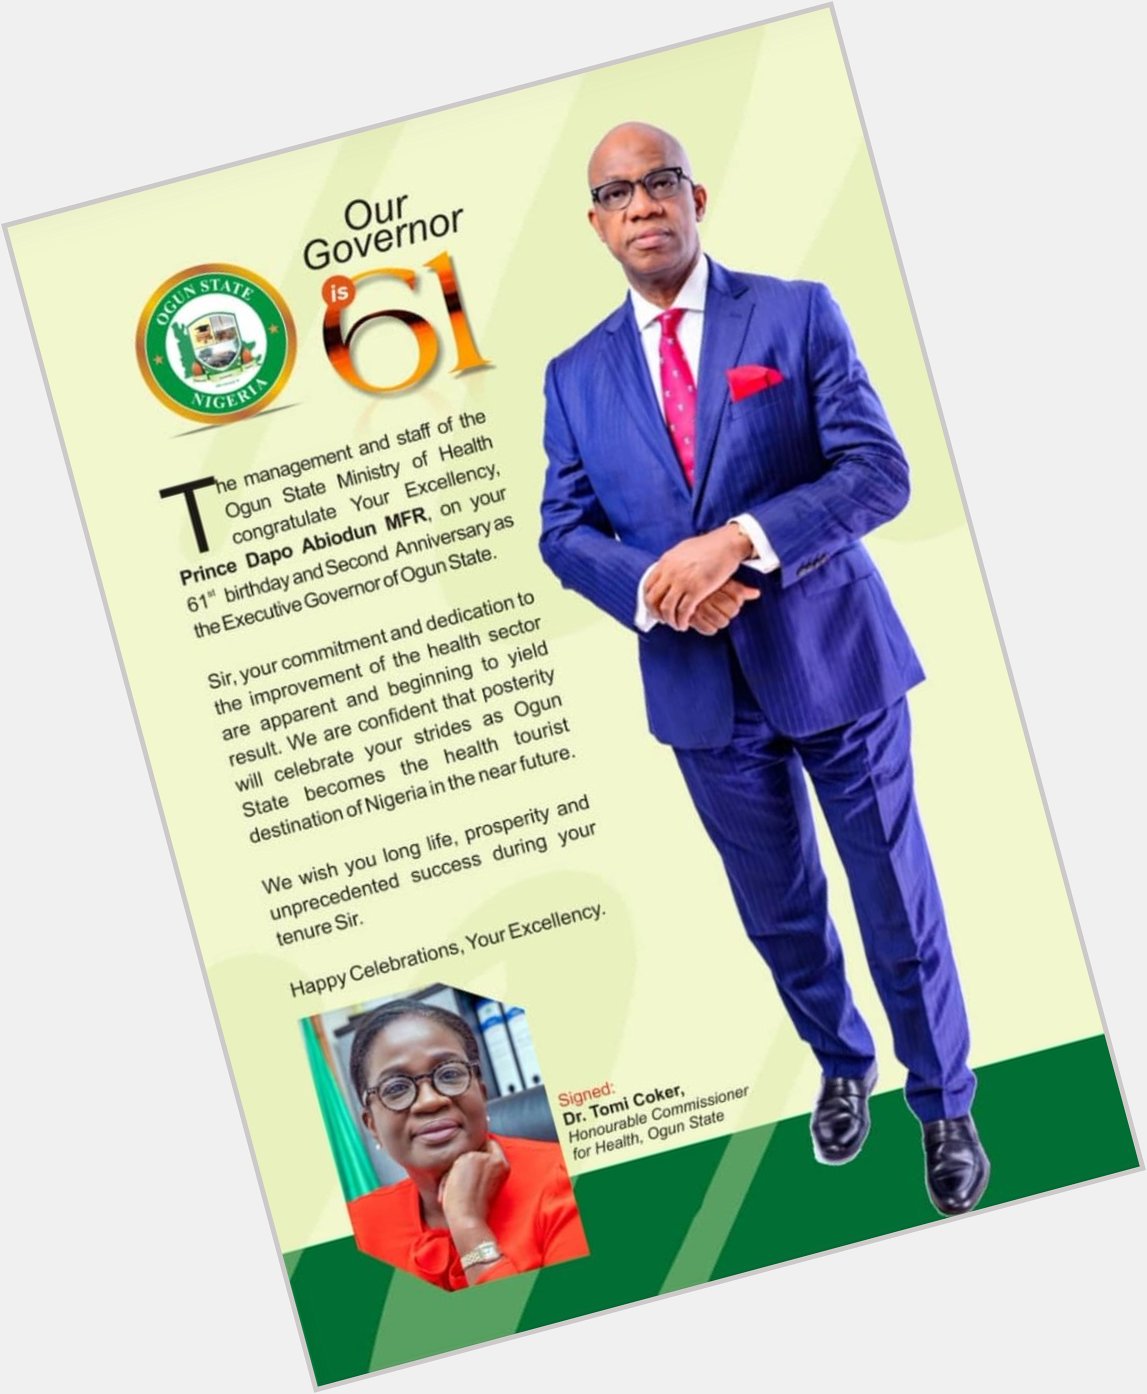 Another year, another stride. Happy birthday to His Excellency Prince Dapo Abiodun 